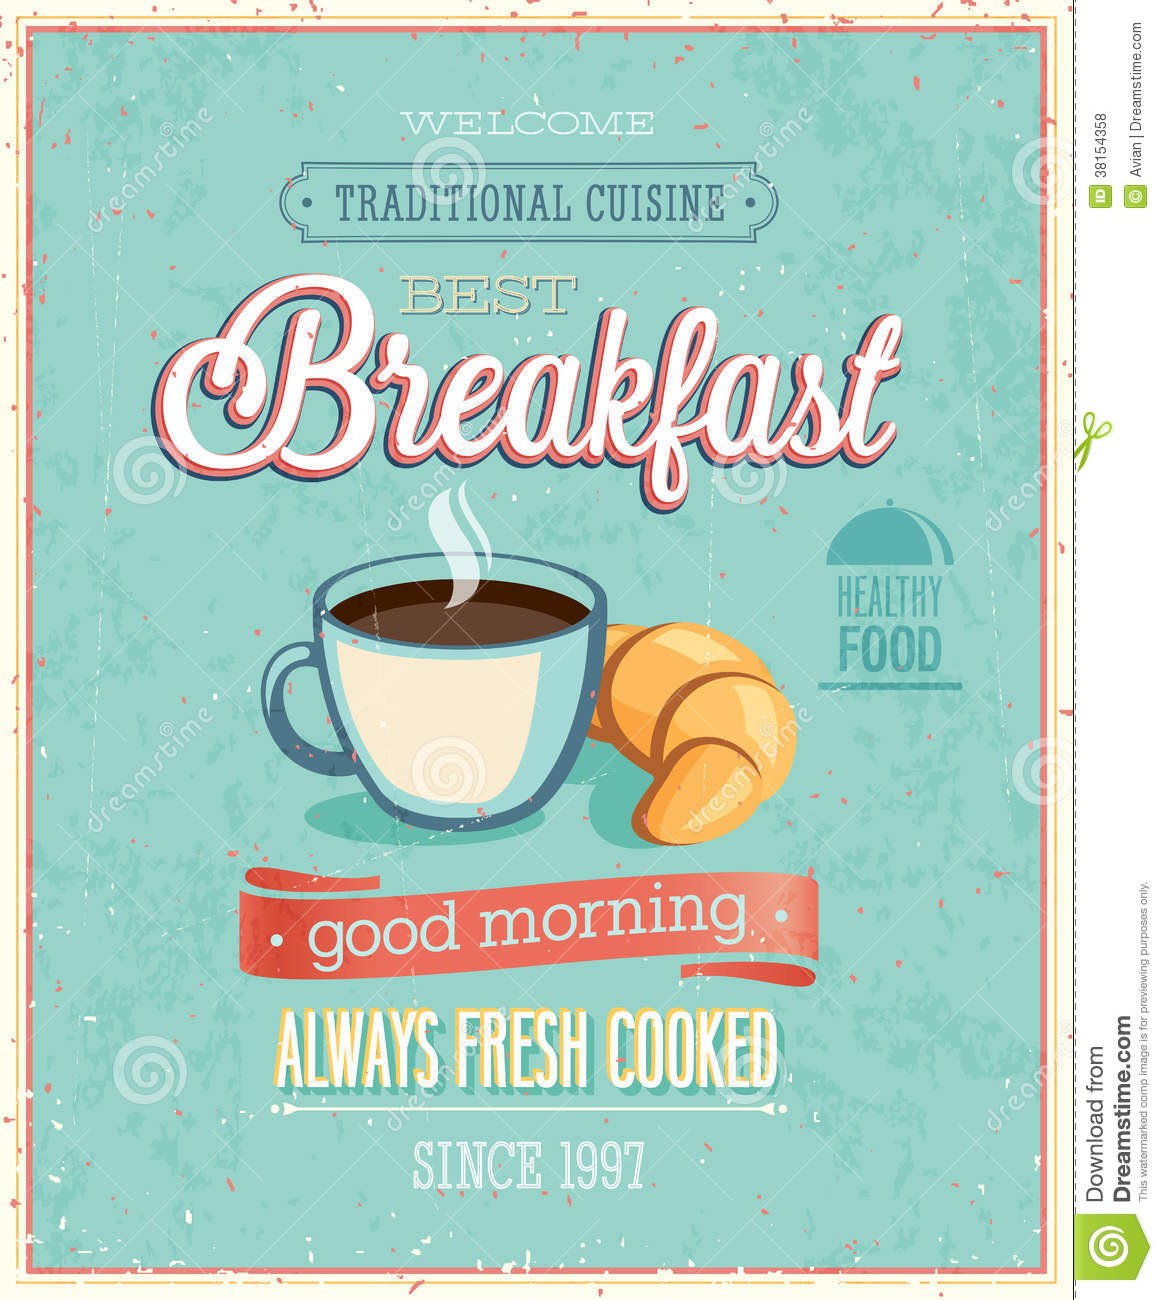 Vintage Breakfast Poster  Royalty Free Stock Photos   Image  38154358